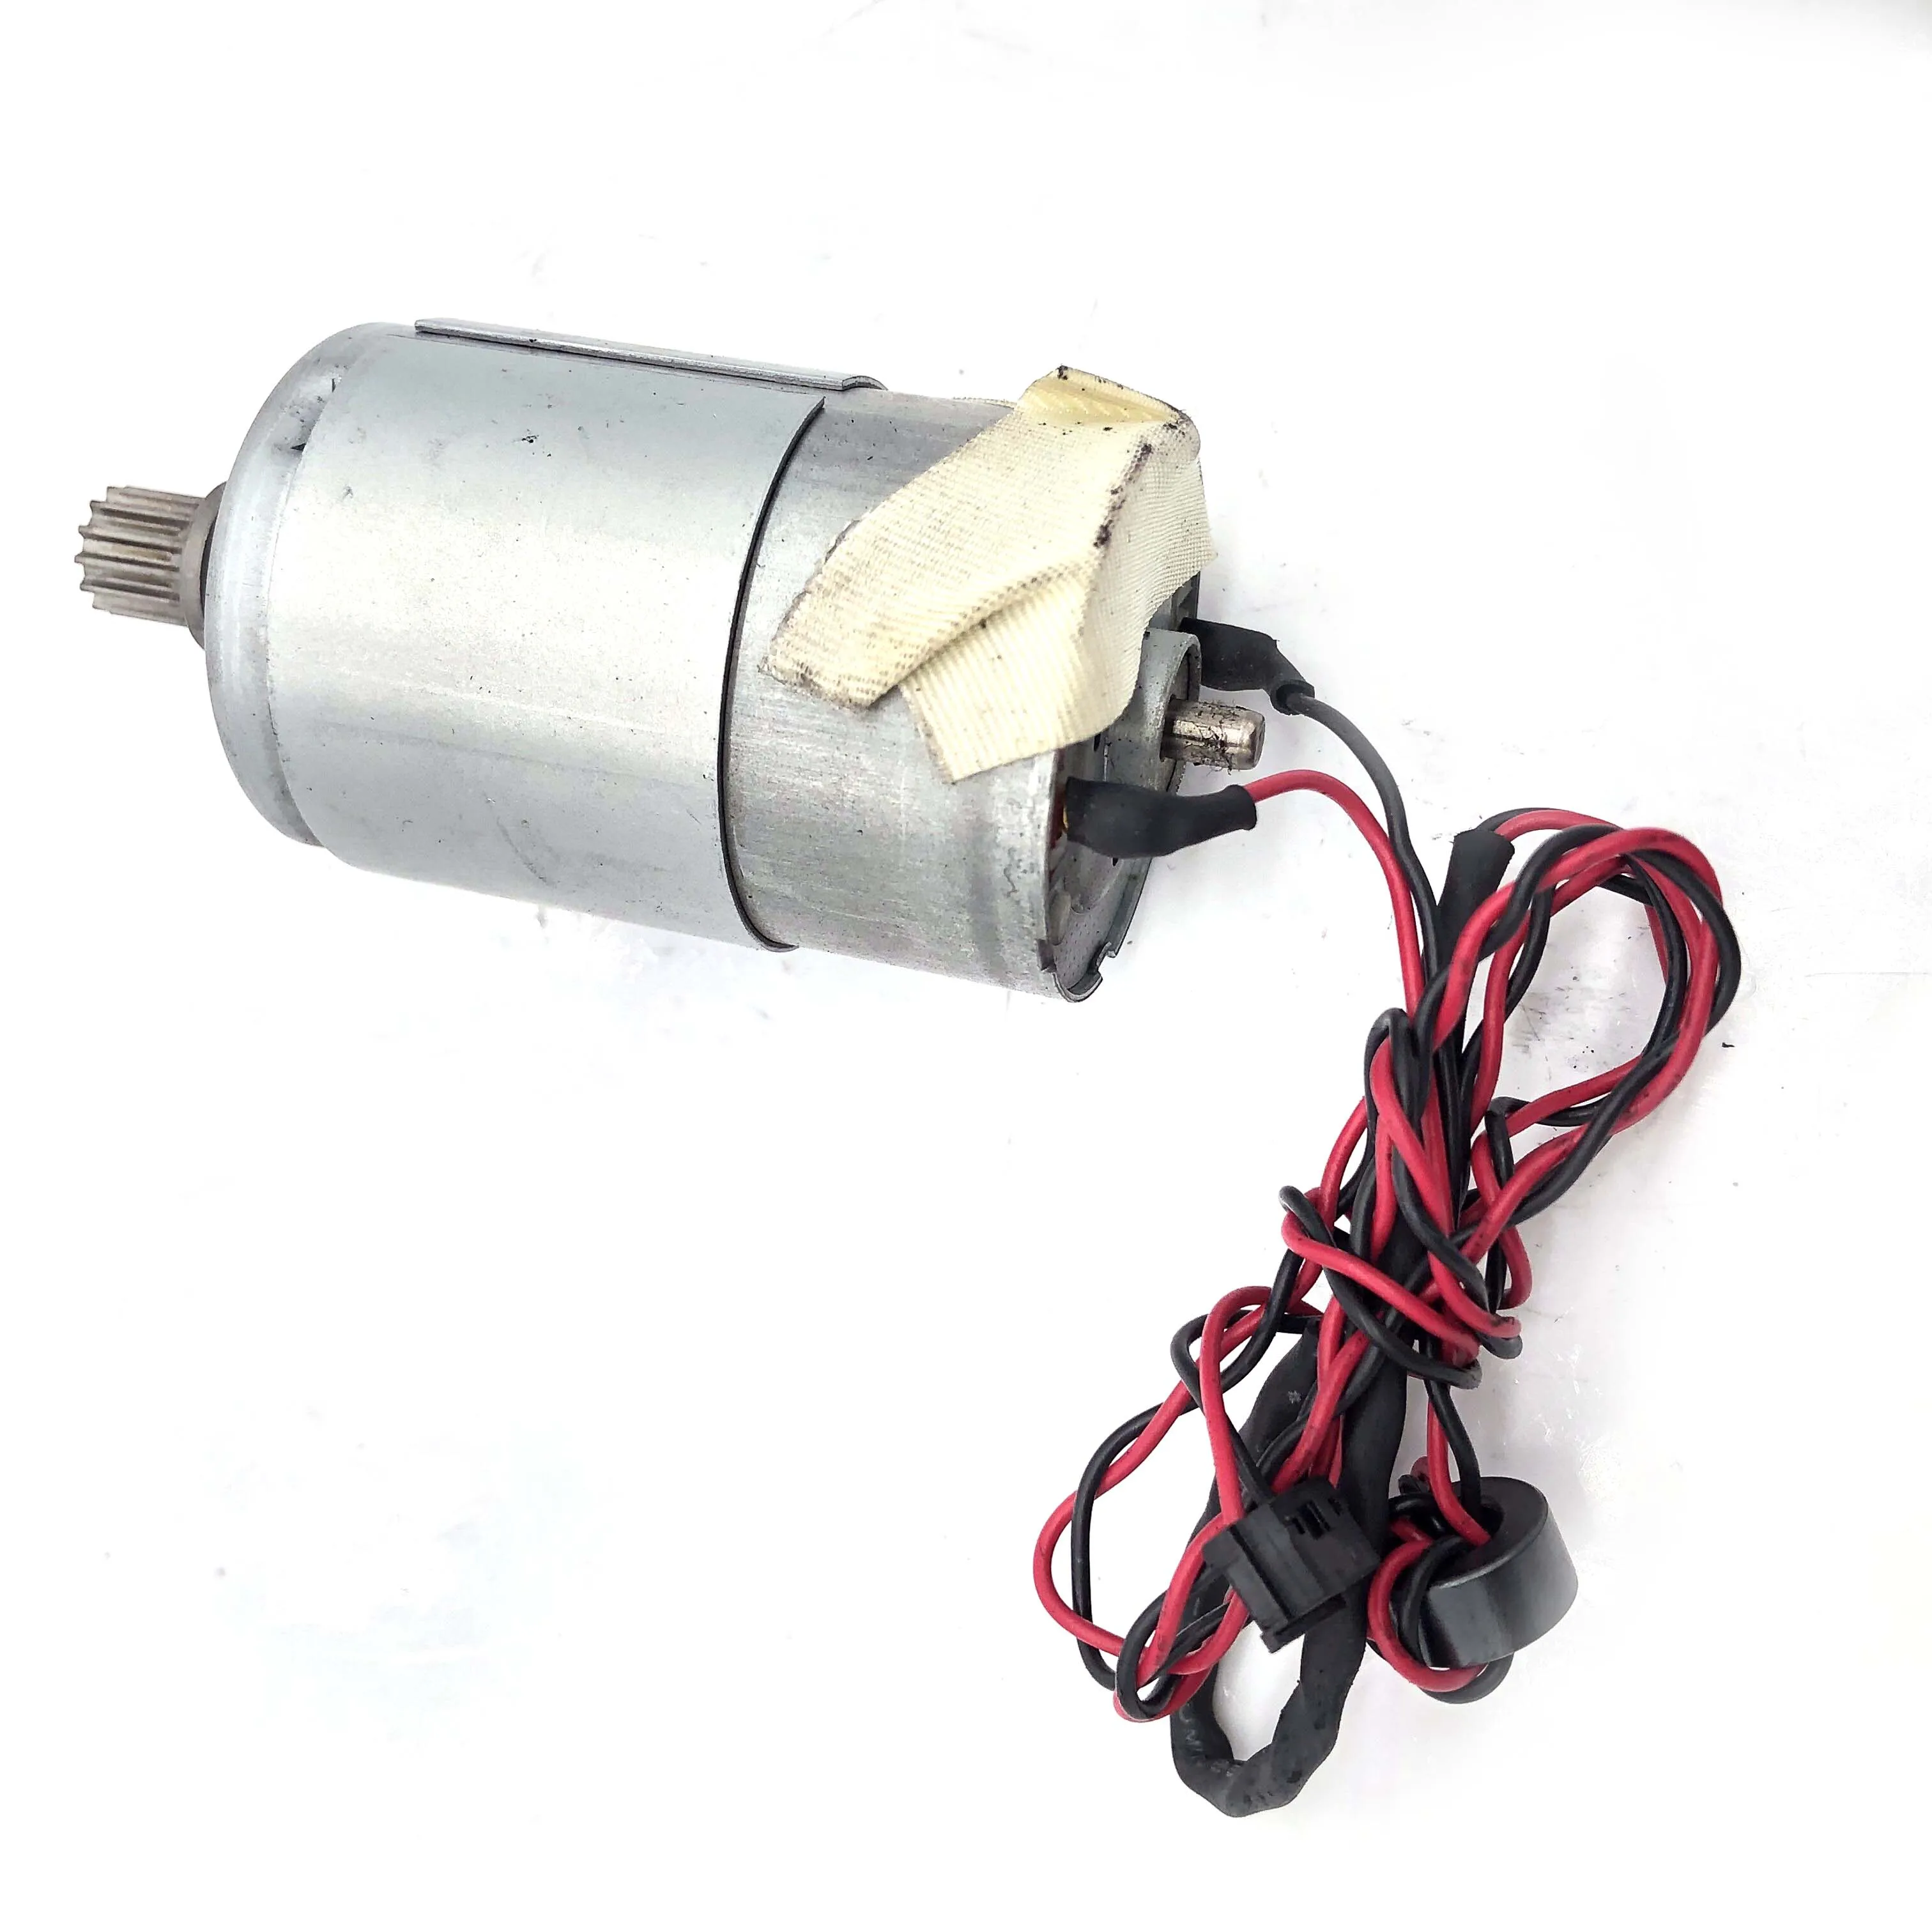 

Gear motor 3890 RS445PA15200R fits for Epson 3850 P600 P800 pro3890 3880 3800 3885